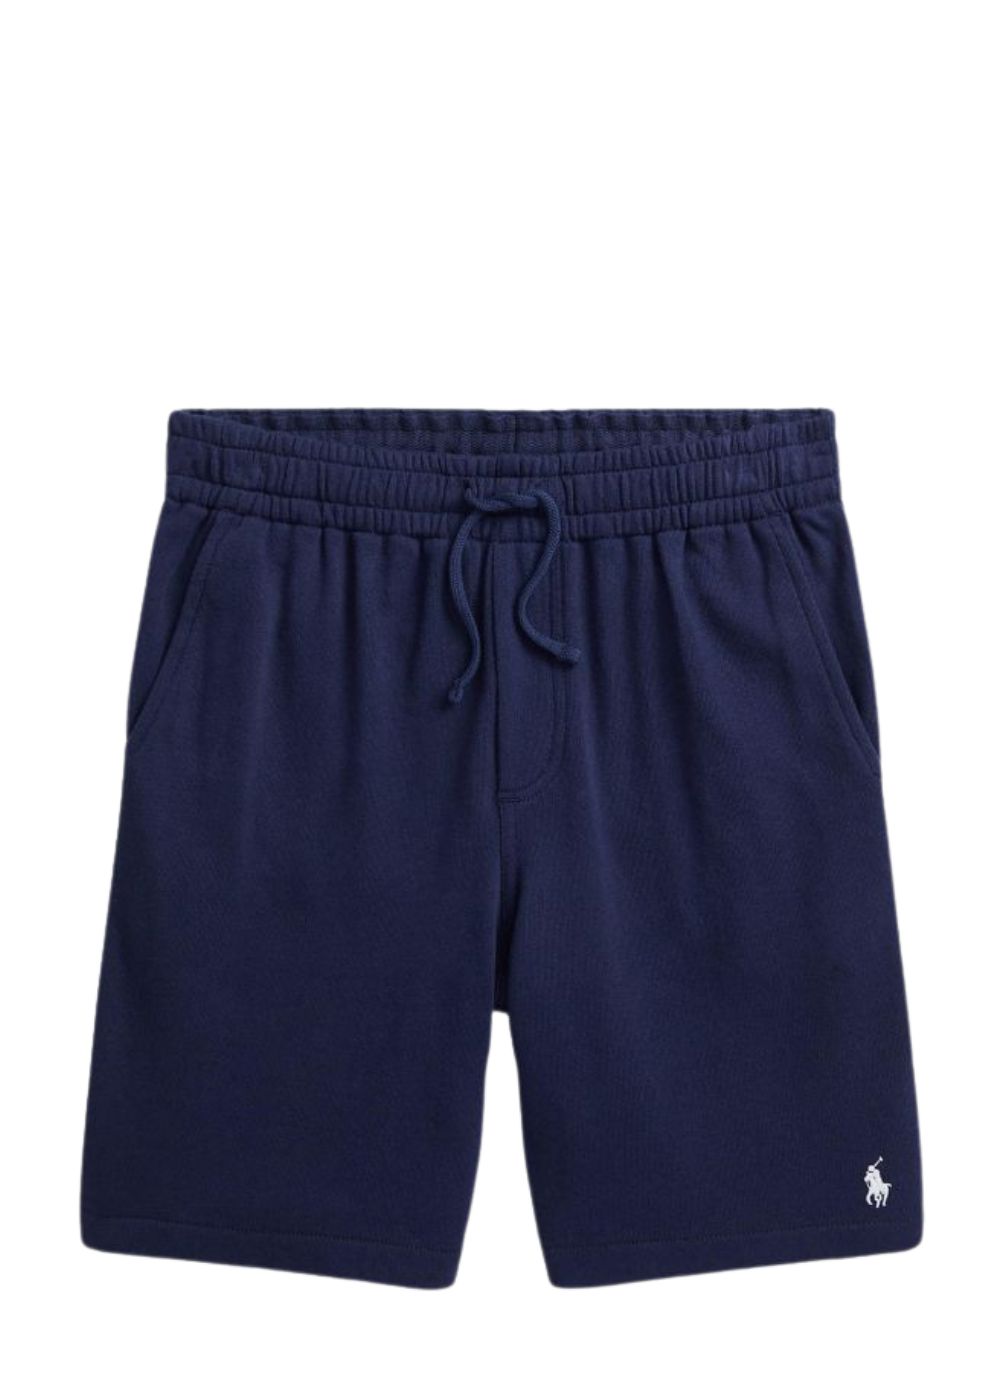 Featured image for “Polo Ralph Lauren Short In Spugna”